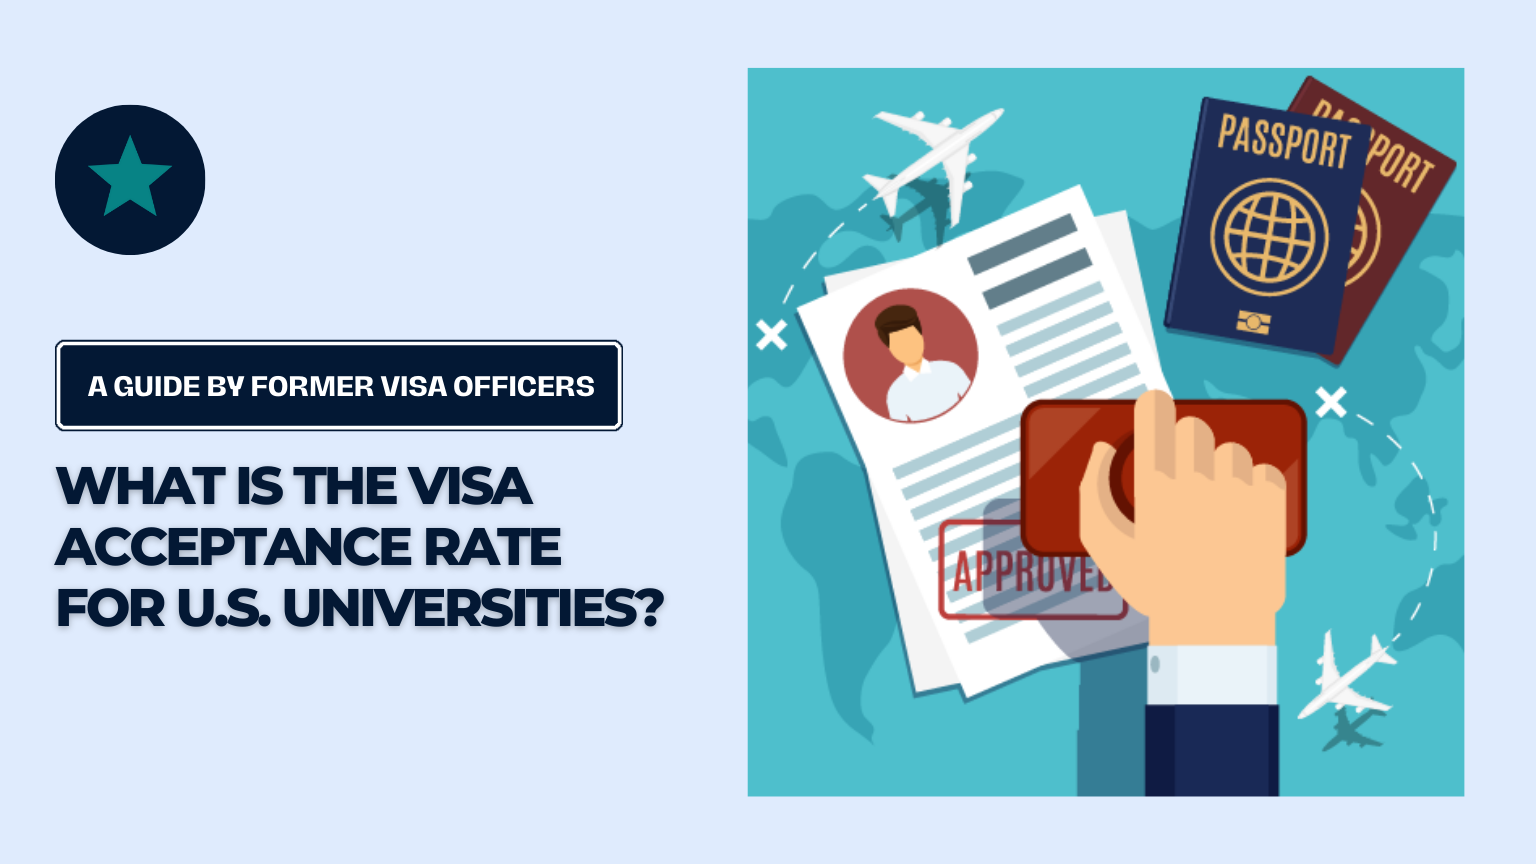 What is the Visa Acceptance Rate For U.S. Universities